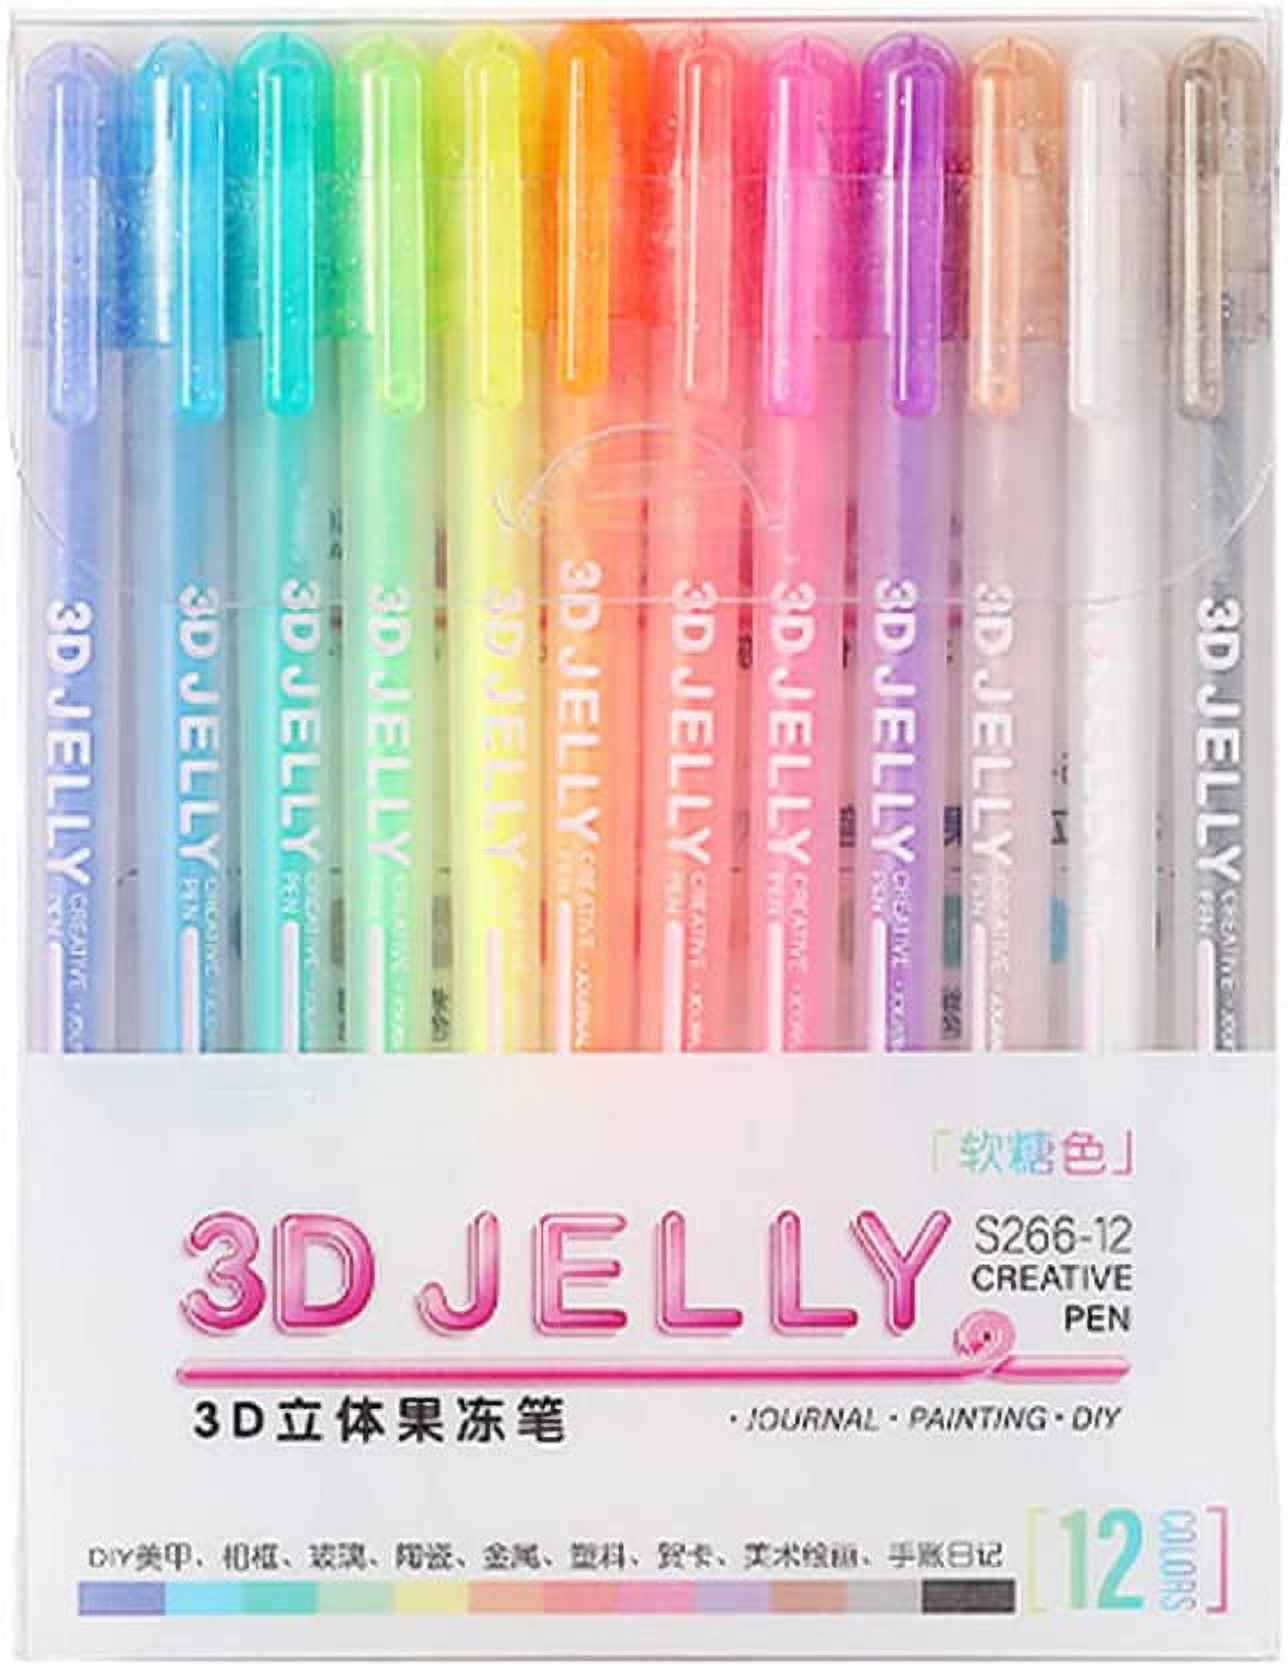 TTCPUYSA 12Pack 3D Jelly Ink Pen Set,Sparkled Assorted Colors Gel  Pens,Highlighters Glitter Gel Pens DIY Fluorescent Painting Pen for Drawing  Marks